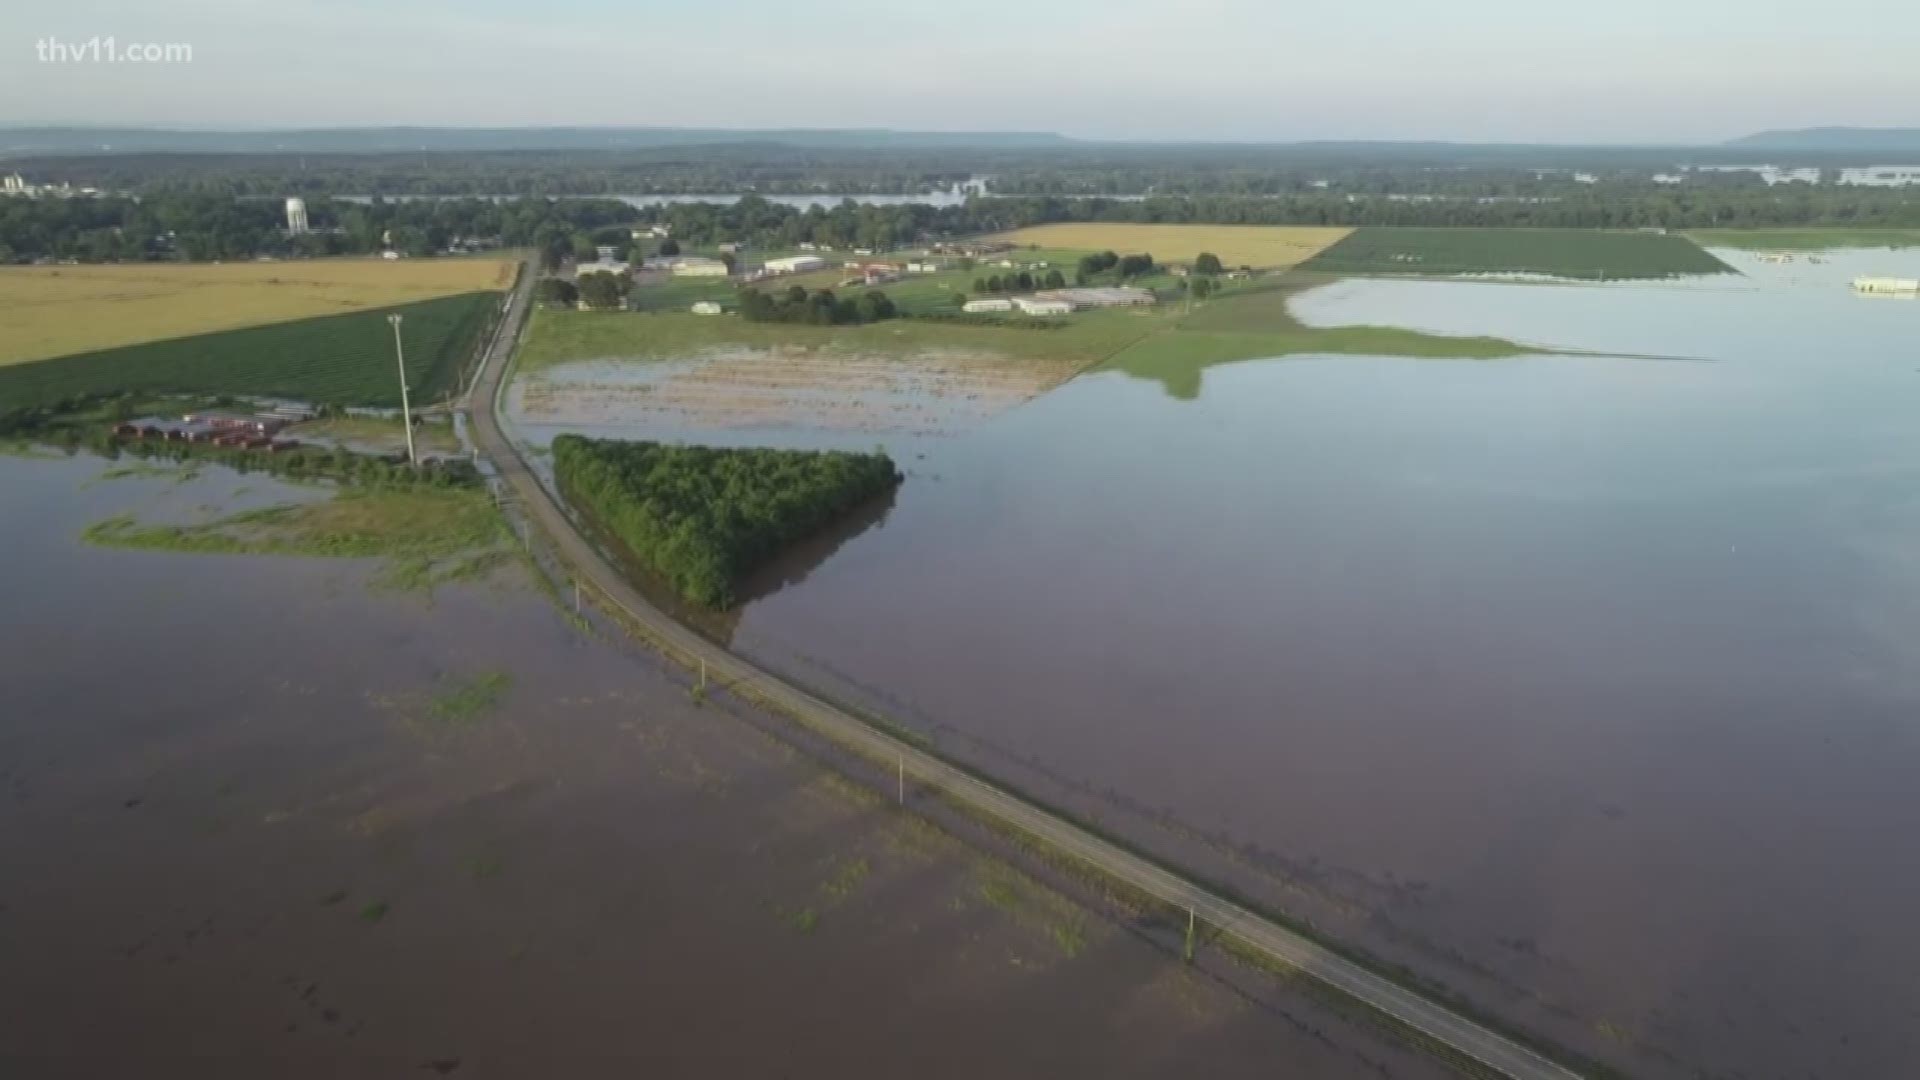 Leaders across the state are working to fix the levee system after our historic flooding.